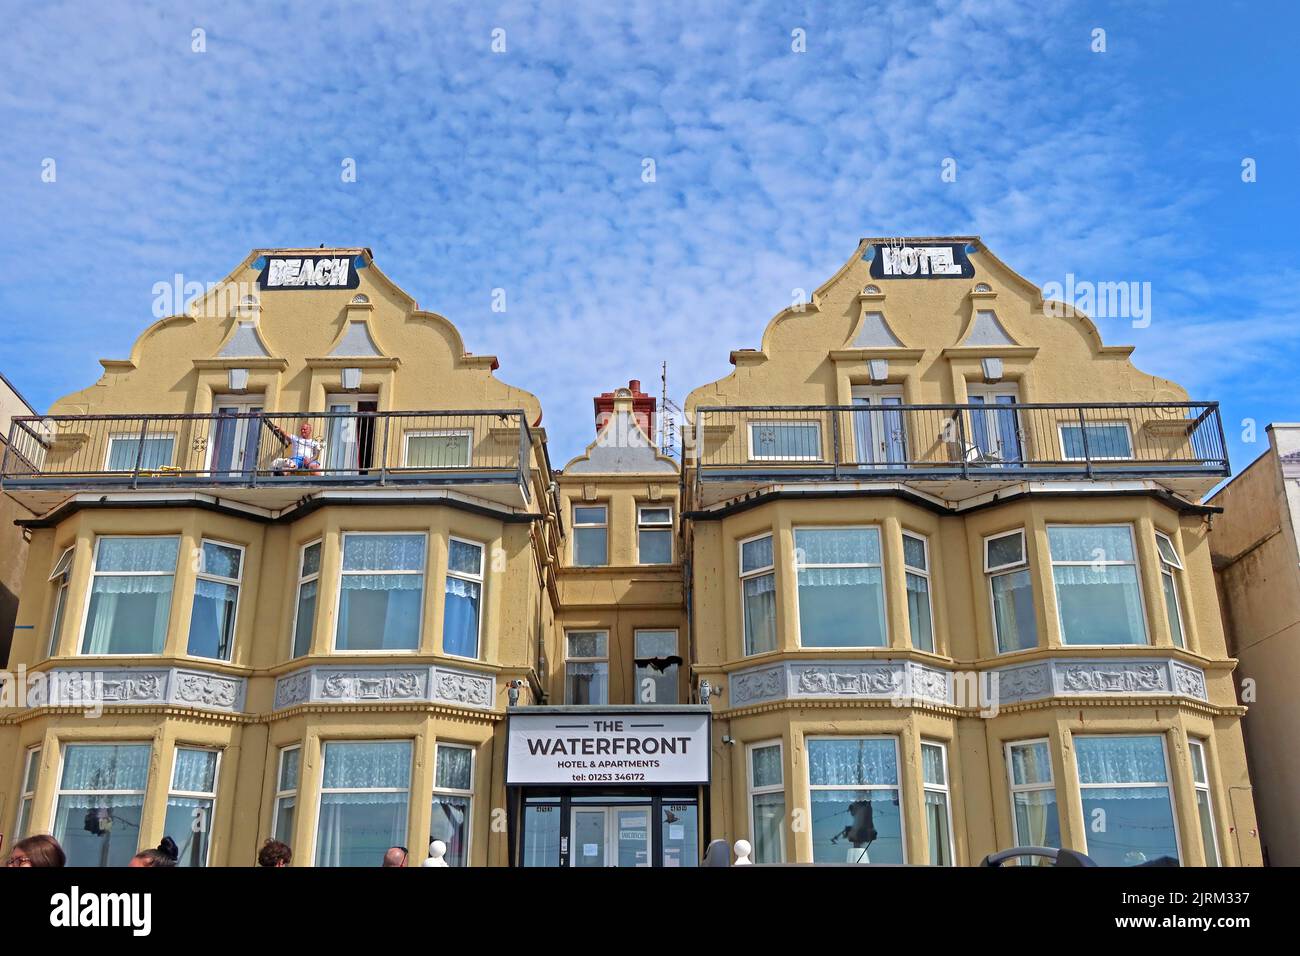 The Waterfront Beach Hotel and Apartments, 453-459 , Promenade, Blackpool , Lancs, ANGLETERRE, ROYAUME-UNI, FY4 1AR Banque D'Images